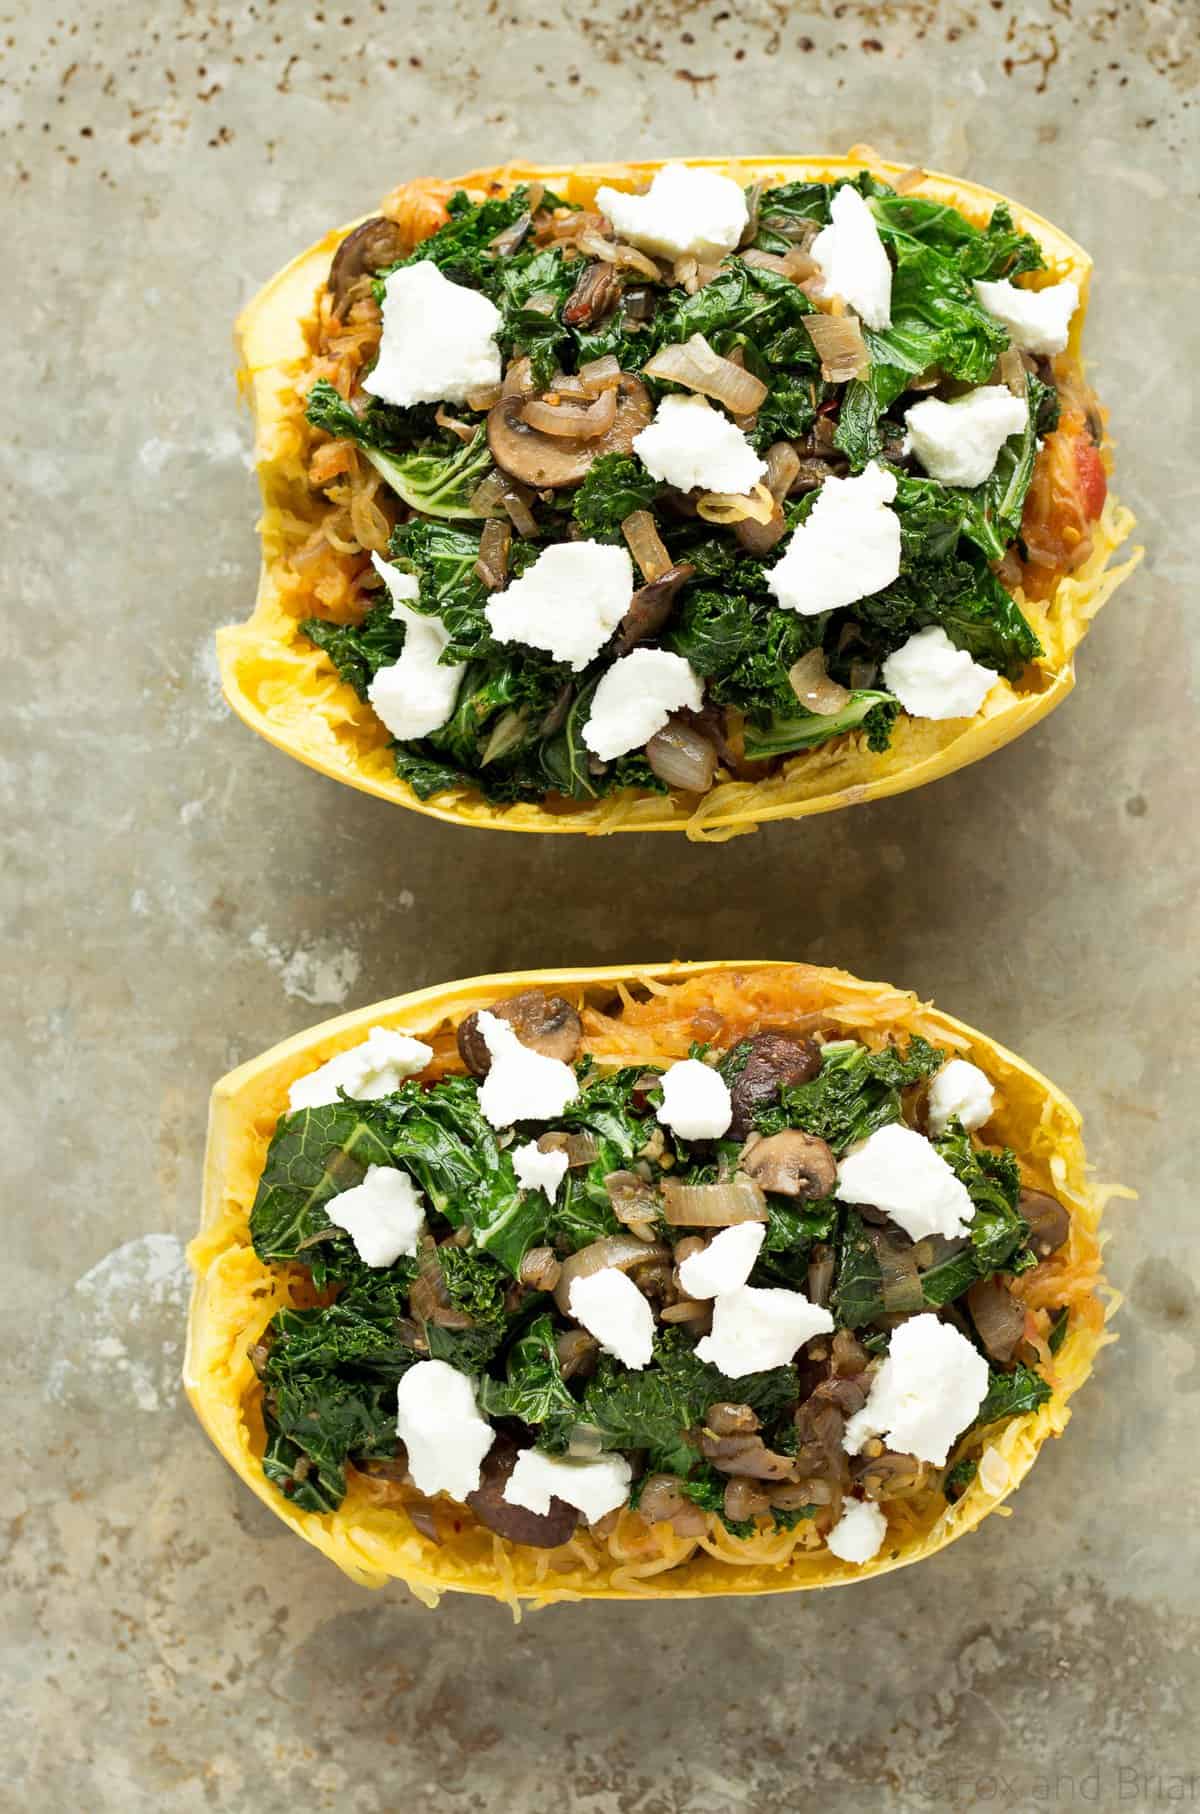 These veggie spaghetti squash boats are vegetarian, with kale, mushrooms and goat cheese. So packed with flavor and super healthy!